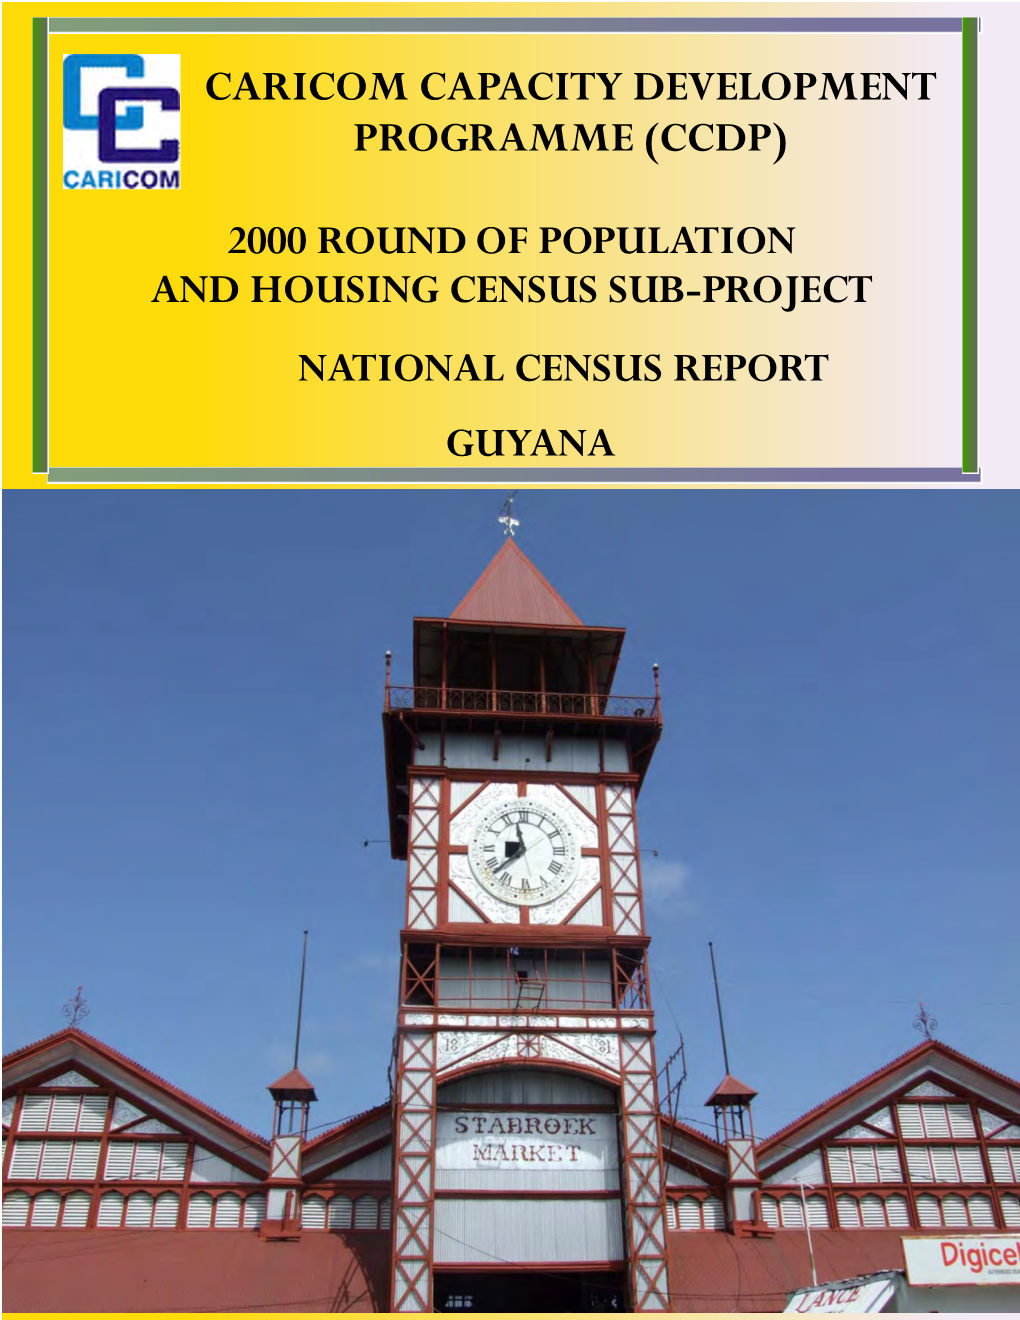 Guyana National Census Report 2000 Round of Population and Housing Census Sub-Project